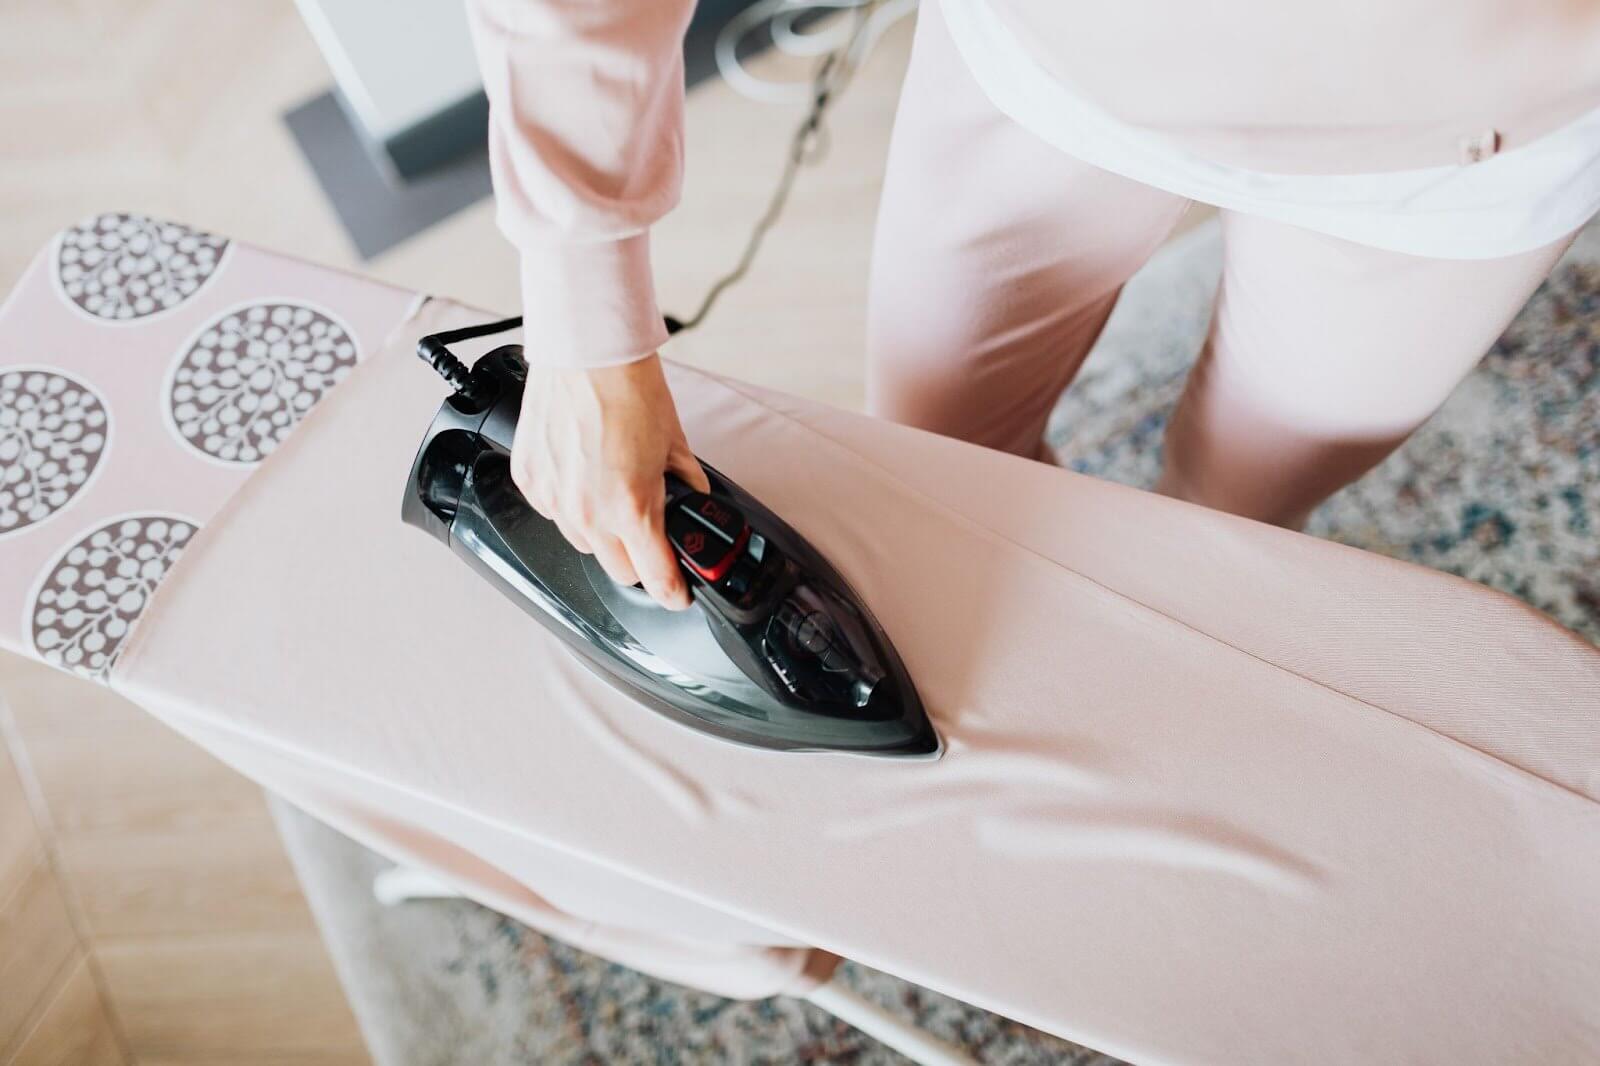 How To Find the Best Iron